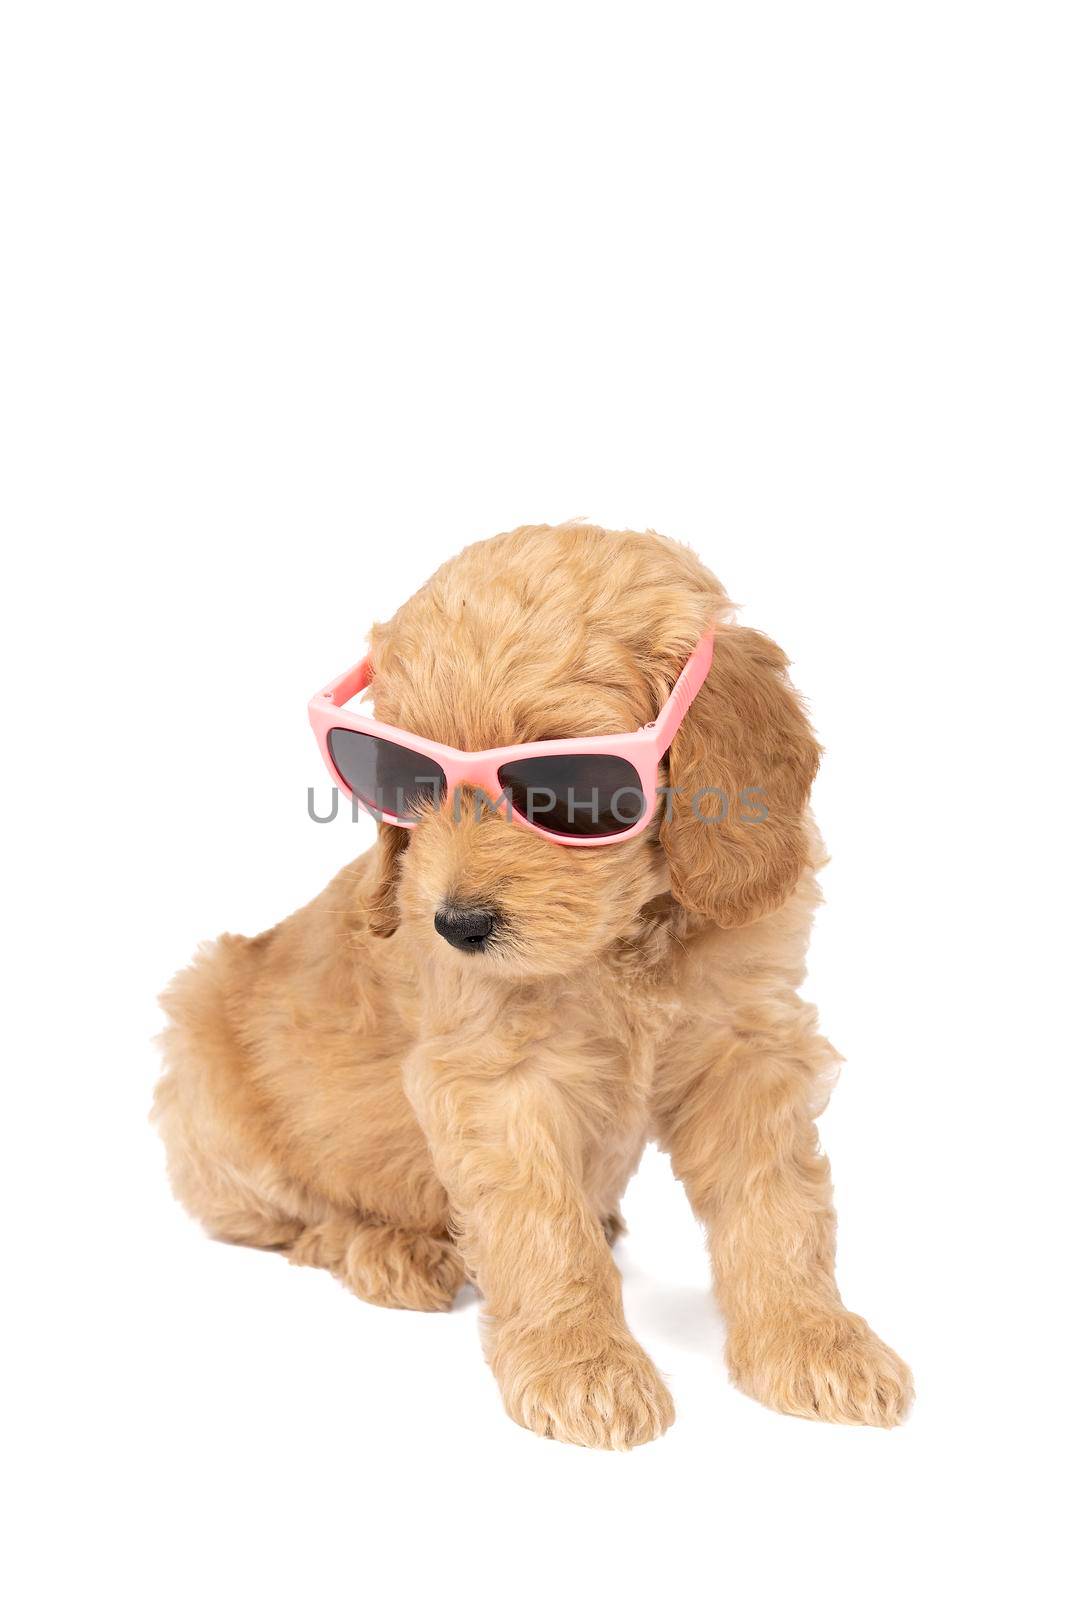 Cute labradoodle puppy sitting looking at the camera wearing pink sunglasses isolated on a white background with space for text by LeoniekvanderVliet